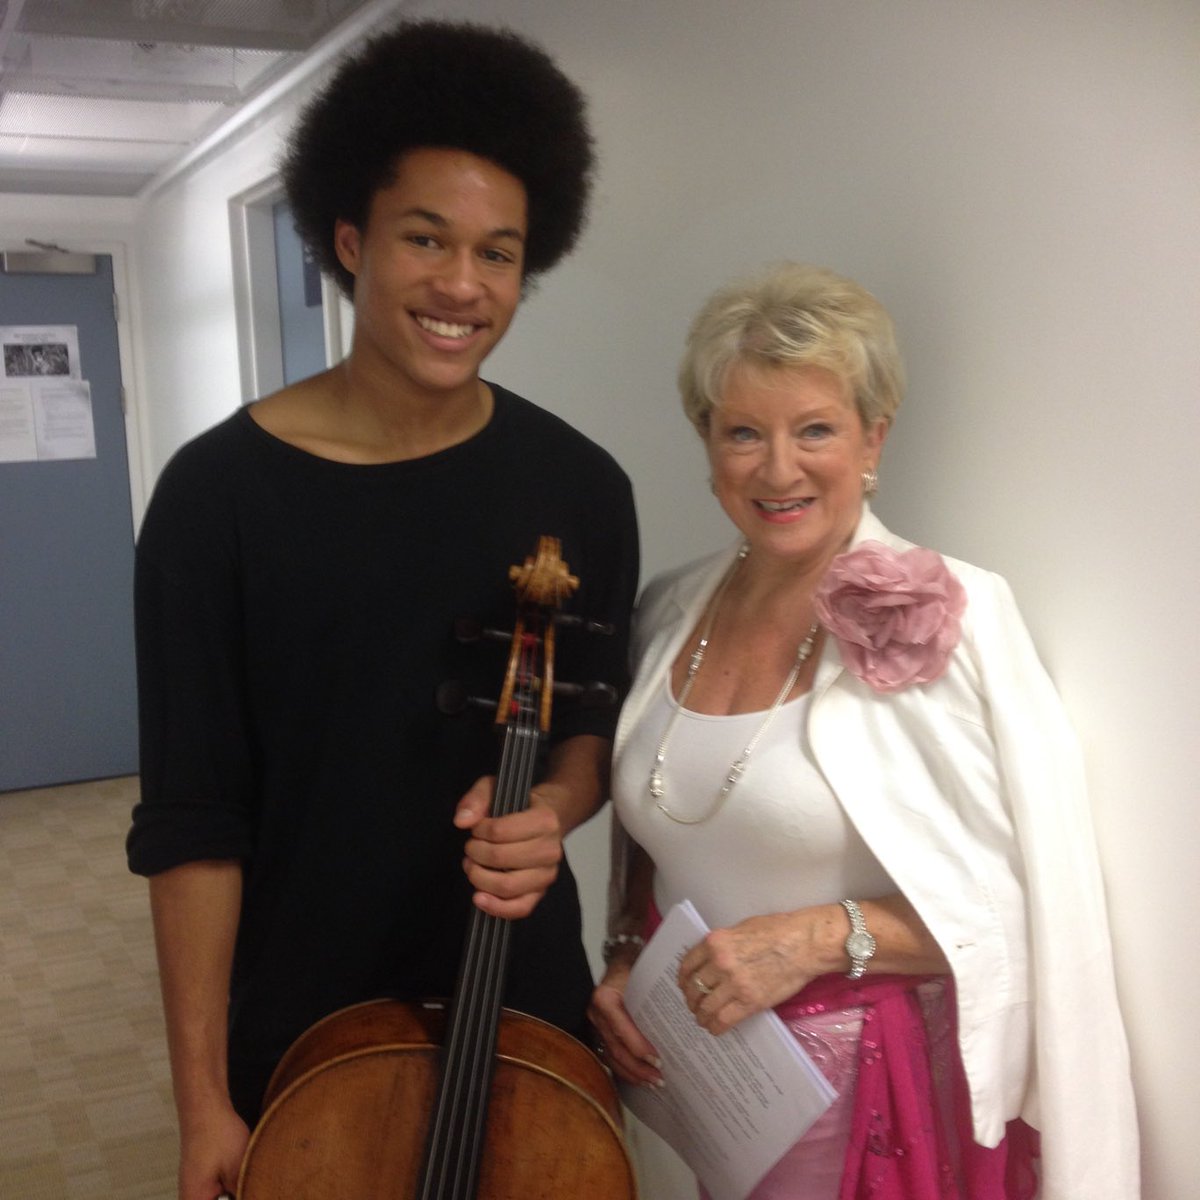 Wonderful to see ⁦@ShekuKM⁩ & family supporting our campaign #SaveWNO @ElizAthertonSop @ClassicFM We need the beauty & constancy of great music now more than ever - in a world of conflict & uncertainty @GOVUK @WelshGovernment